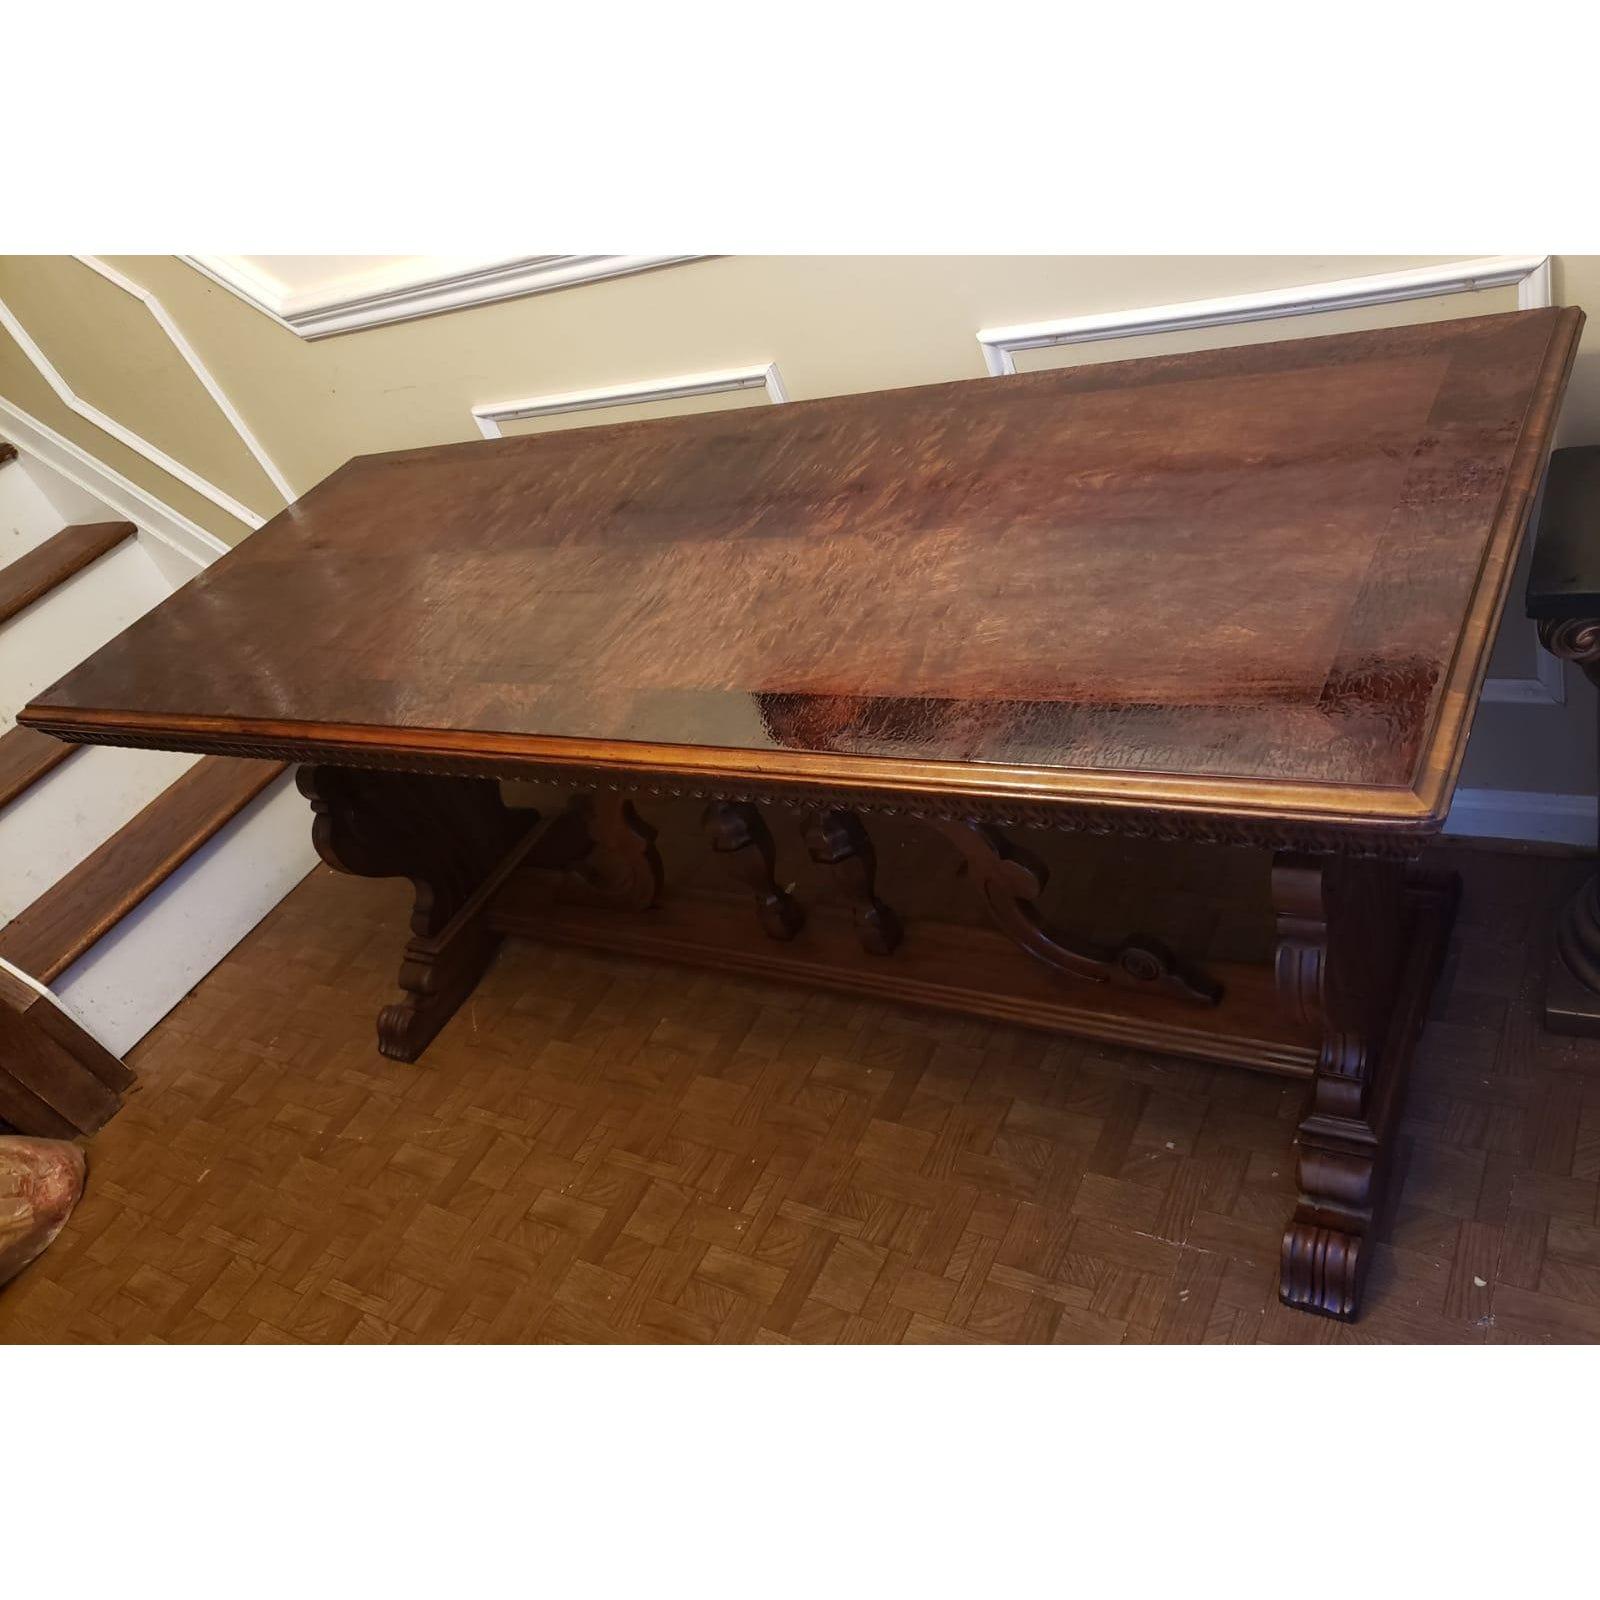 Very Rare 1910s Imperial Grand Rapids trestle table in fine carved walnut wood. Top made out of Banded and bookmatched dark walnut veneer. Table has been refinished and is in great condition. This table was first commissioned for the Central United